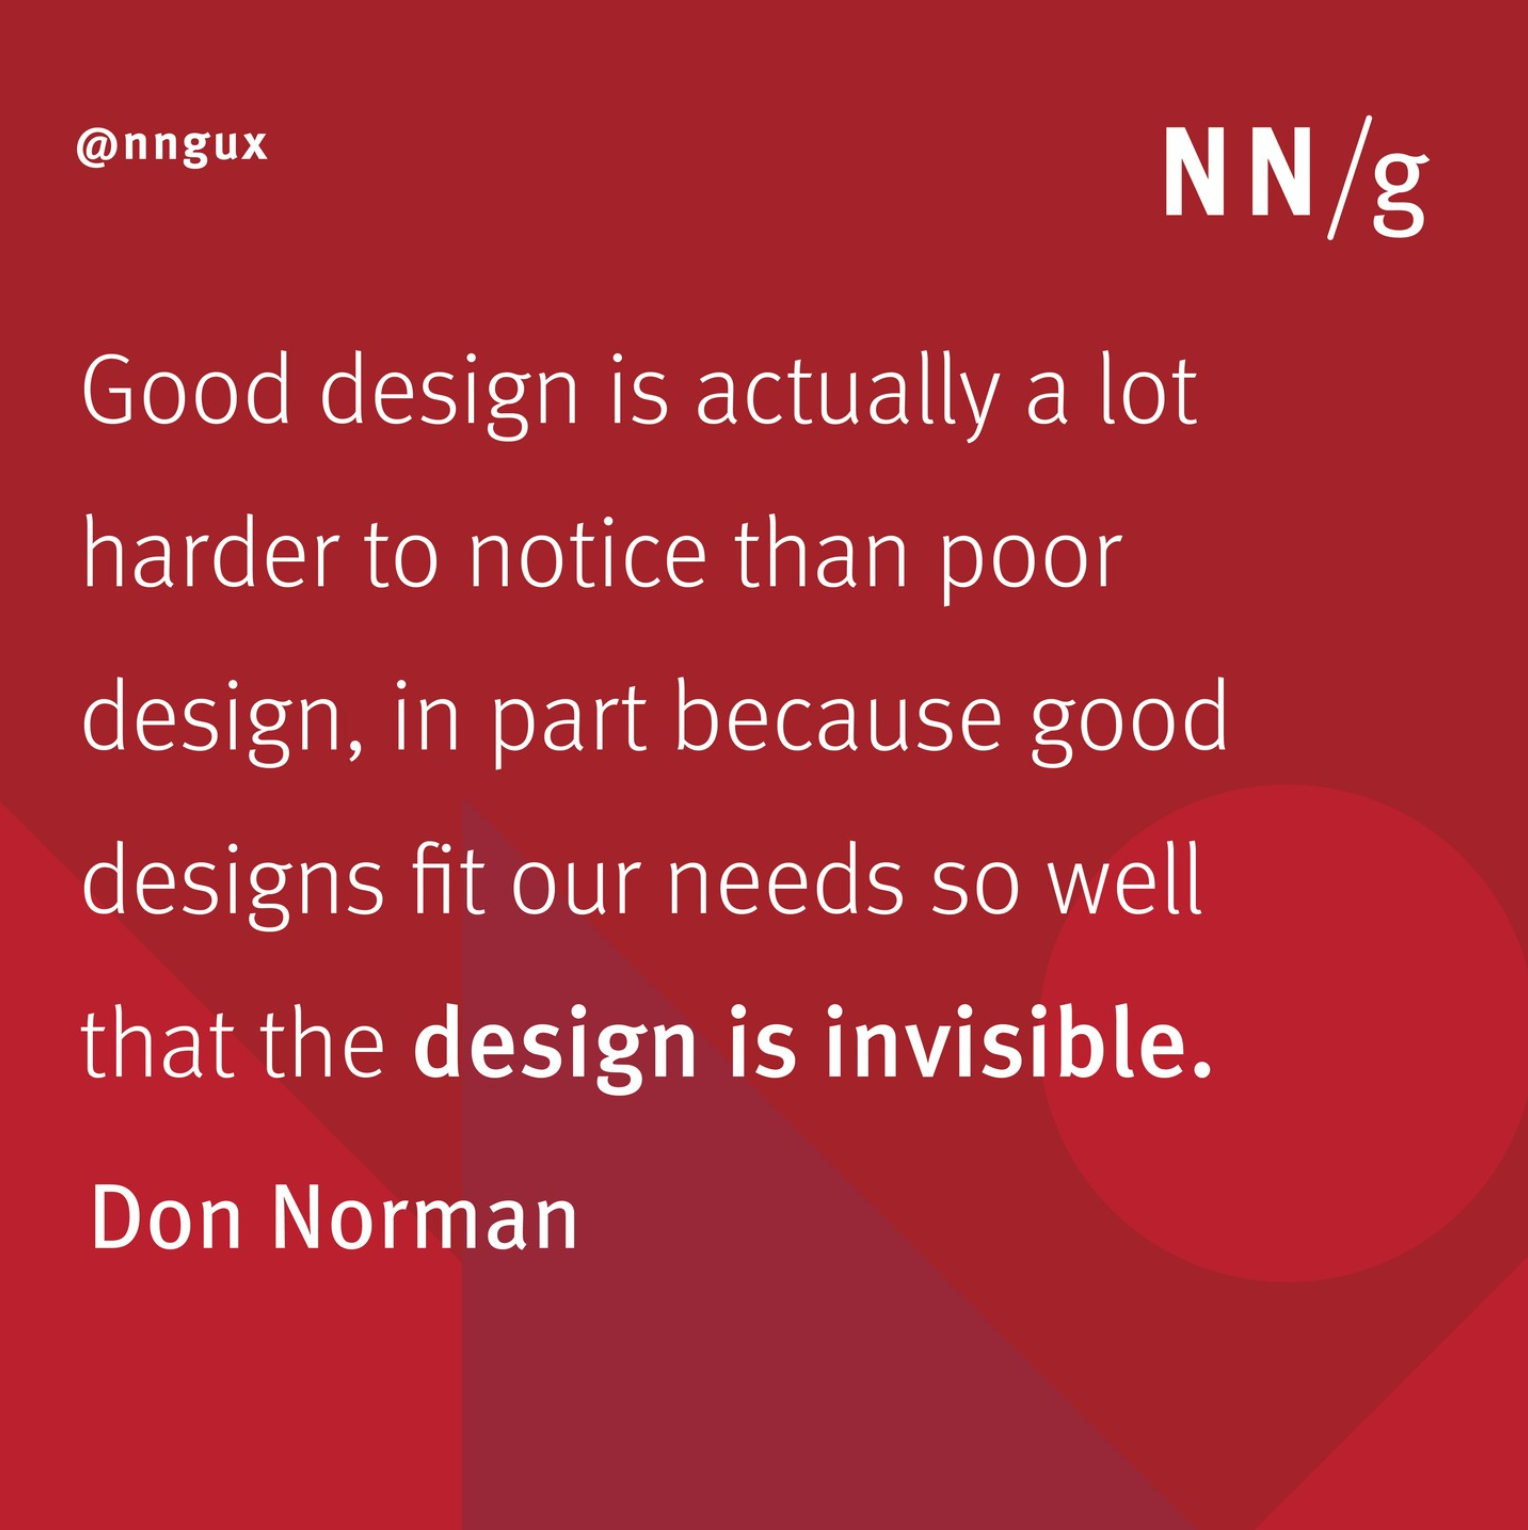 Quote for Don Norman, "Good design is actually a lot harder to notice than poor design, in part because good designs fit our needs so well that the design is invisible.